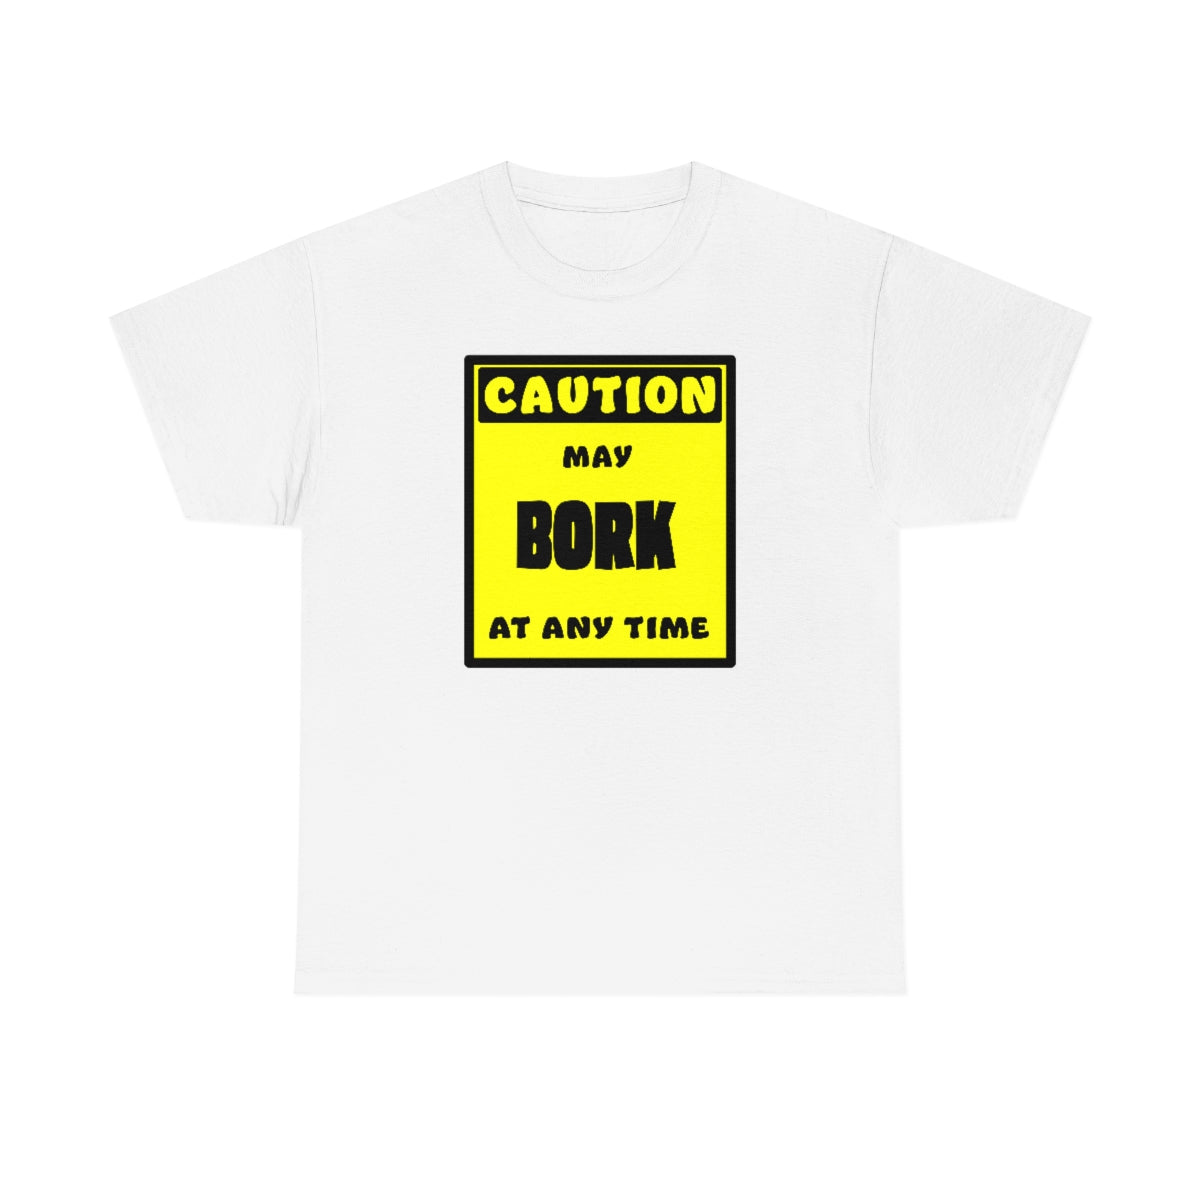 CAUTION! May BORK at any time! - T-Shirt T-Shirt AFLT-Whootorca White S 